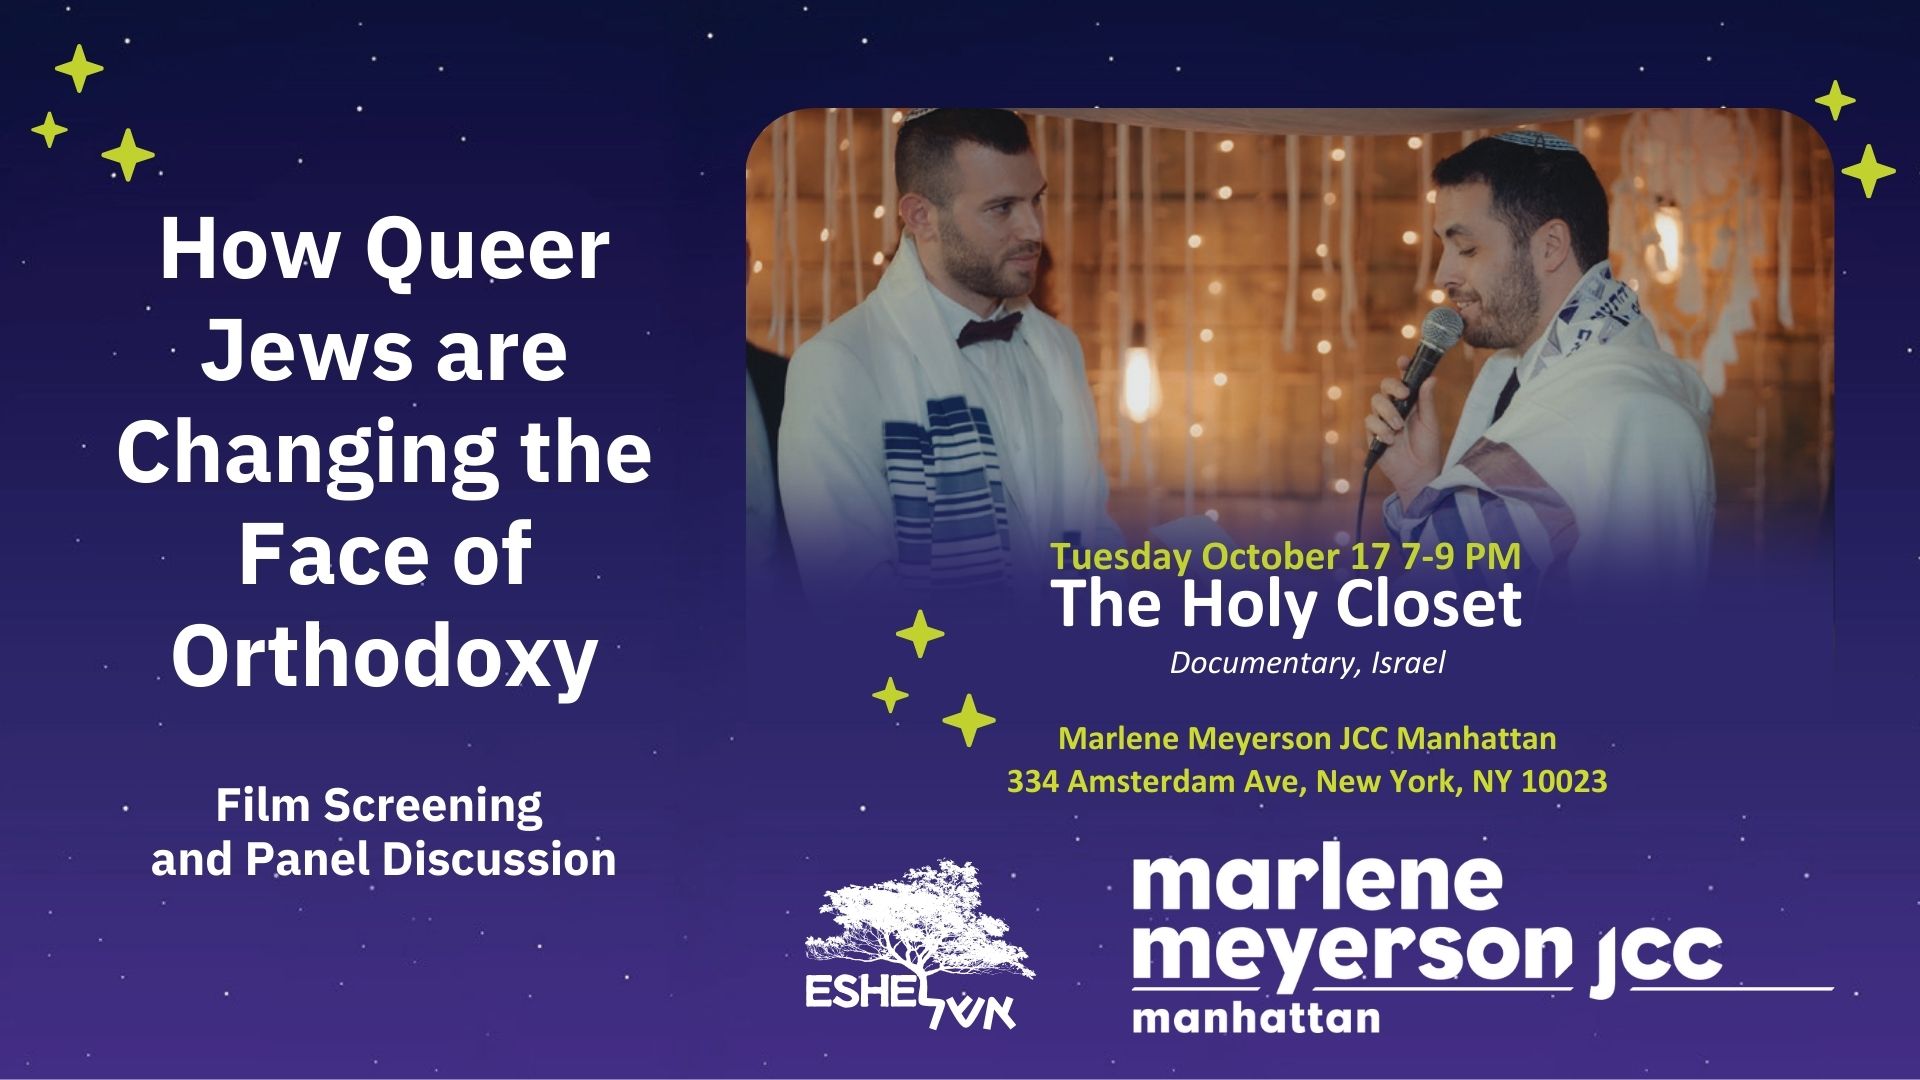 How Queer Jews are Changing the Face of Orthodoxy: Film Screening and Panel Discussion | Tuesday October 17 @ 7-9 pm, Marlene Myerson JCC Manhattan